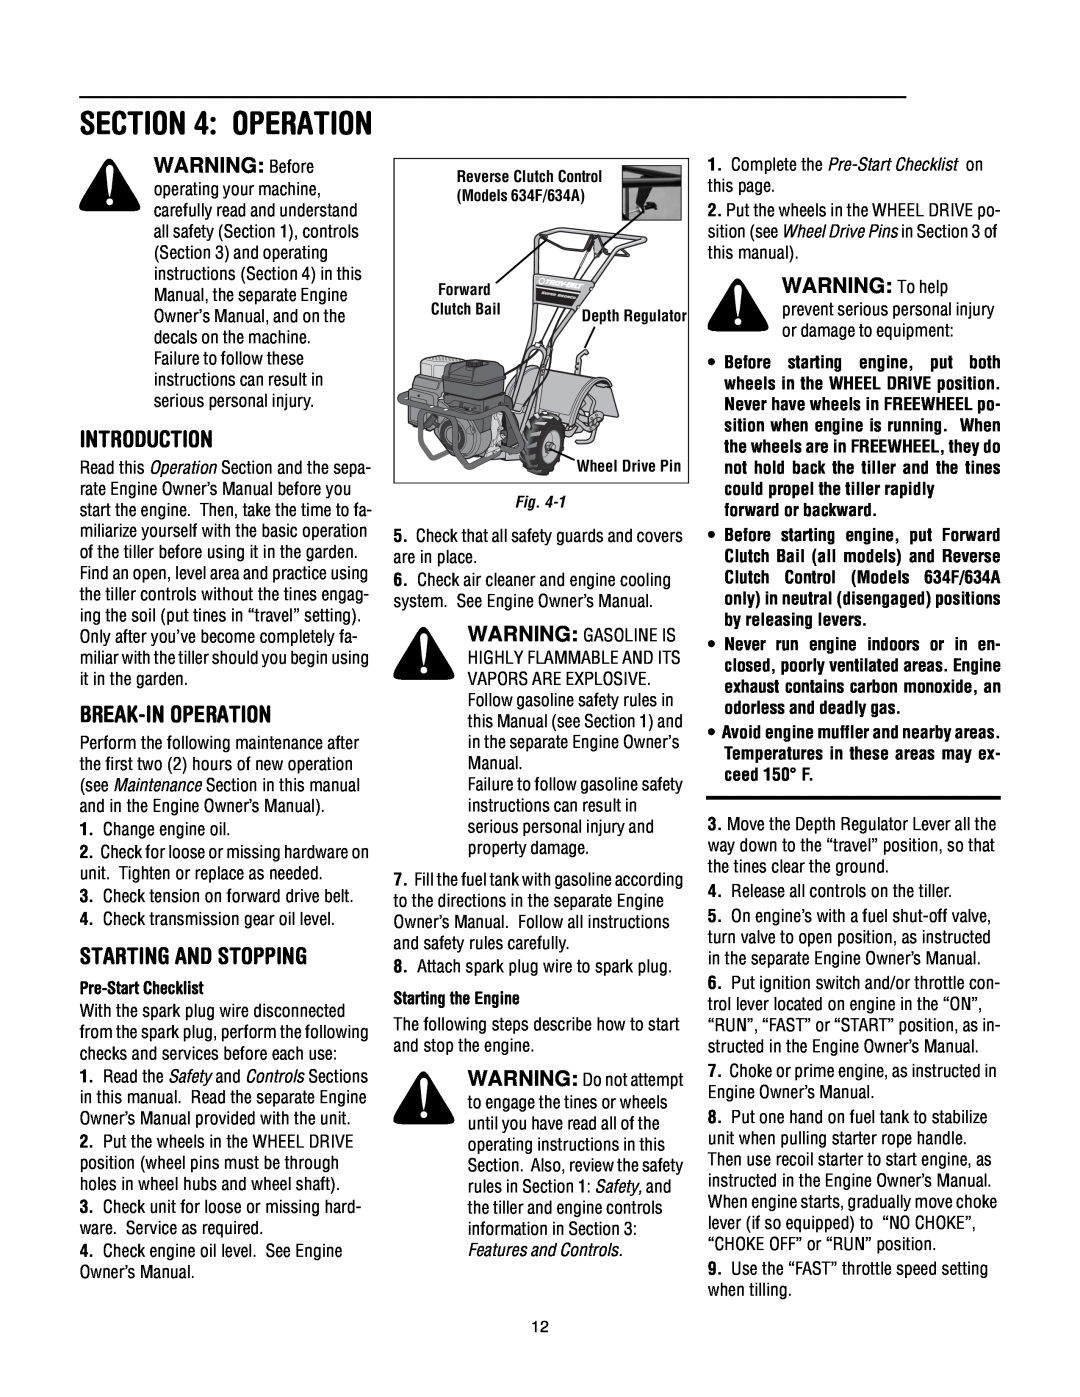 Troy-Bilt 630C-Tuffy Break-In Operation, Starting And Stopping, WARNING To help, Pre-Start Checklist, Starting the Engine 